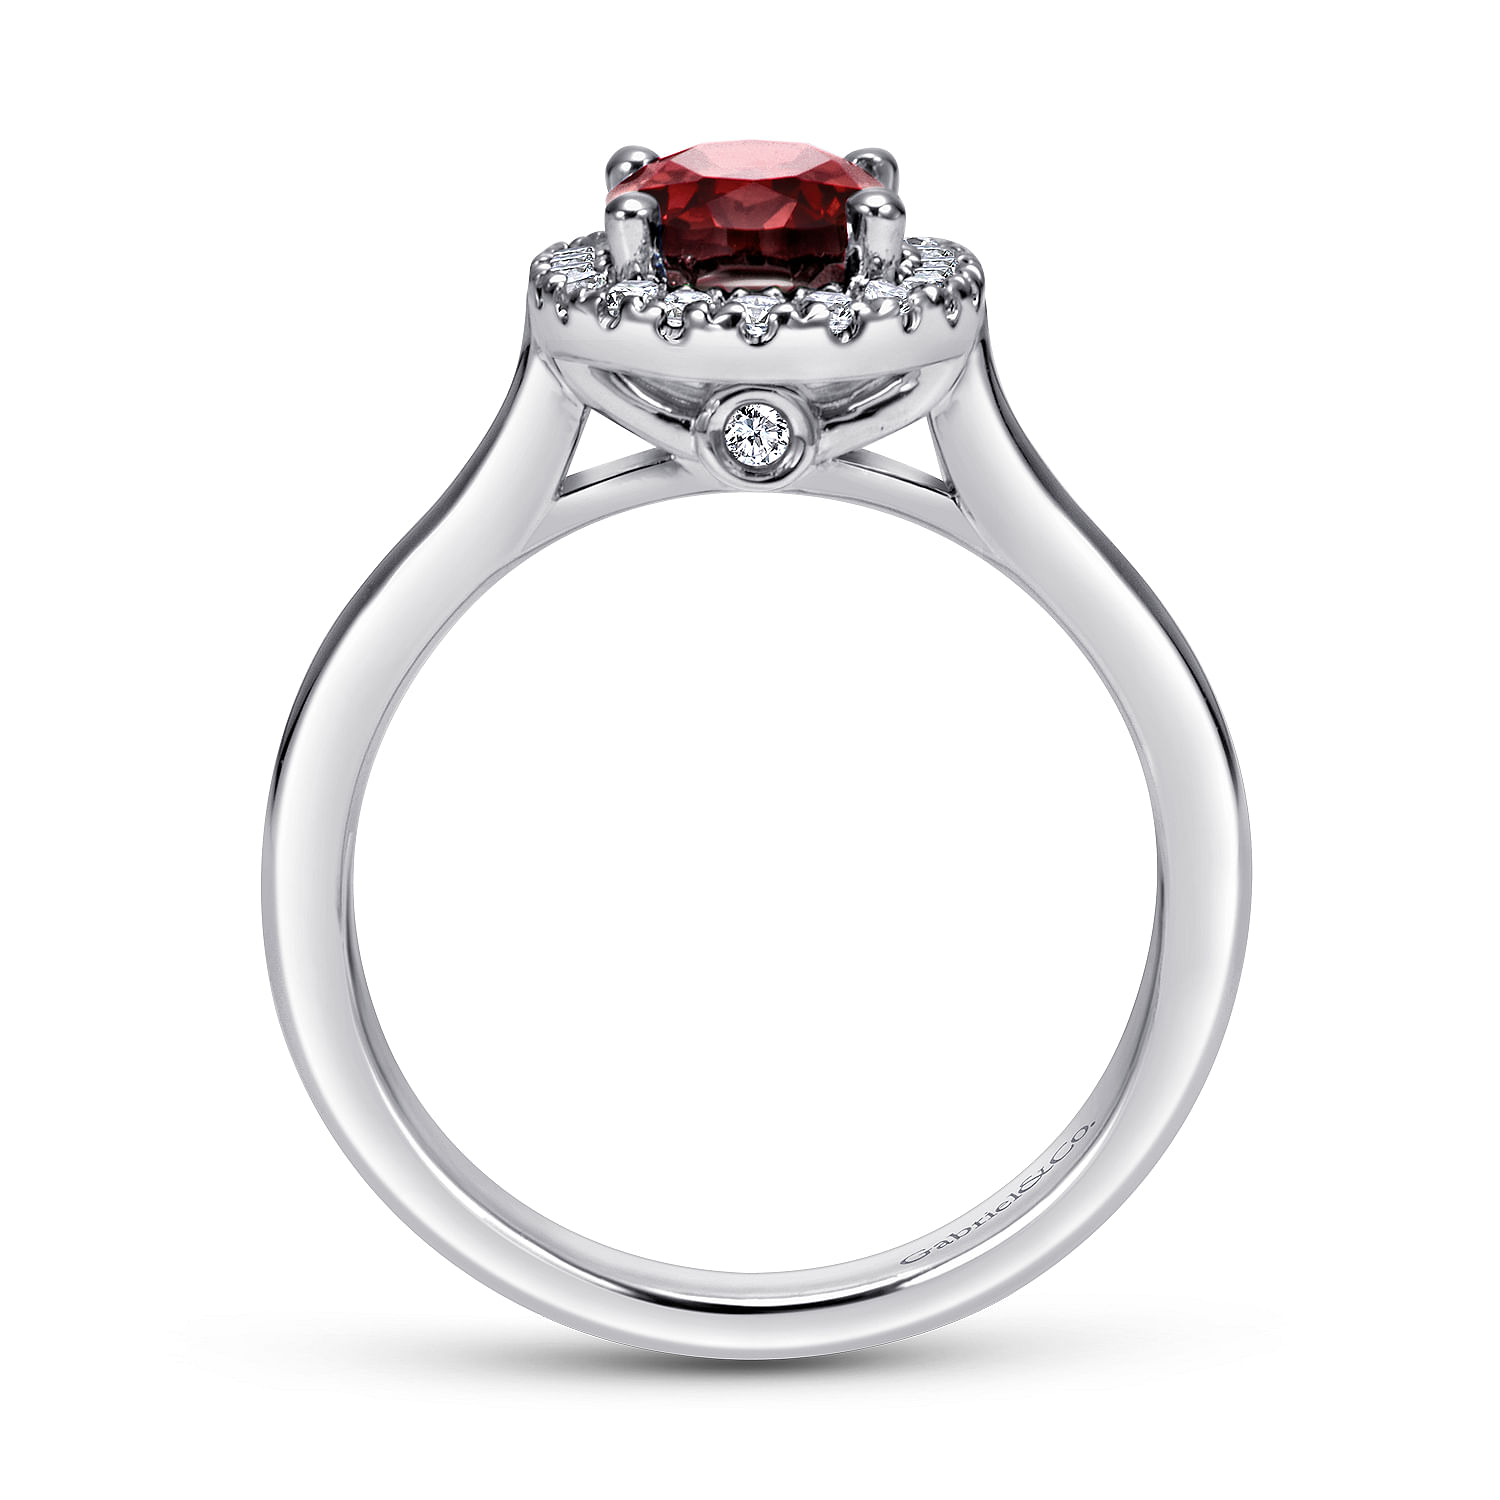 14K White Gold Classic Oval Garnet and Diamond Halo Ring